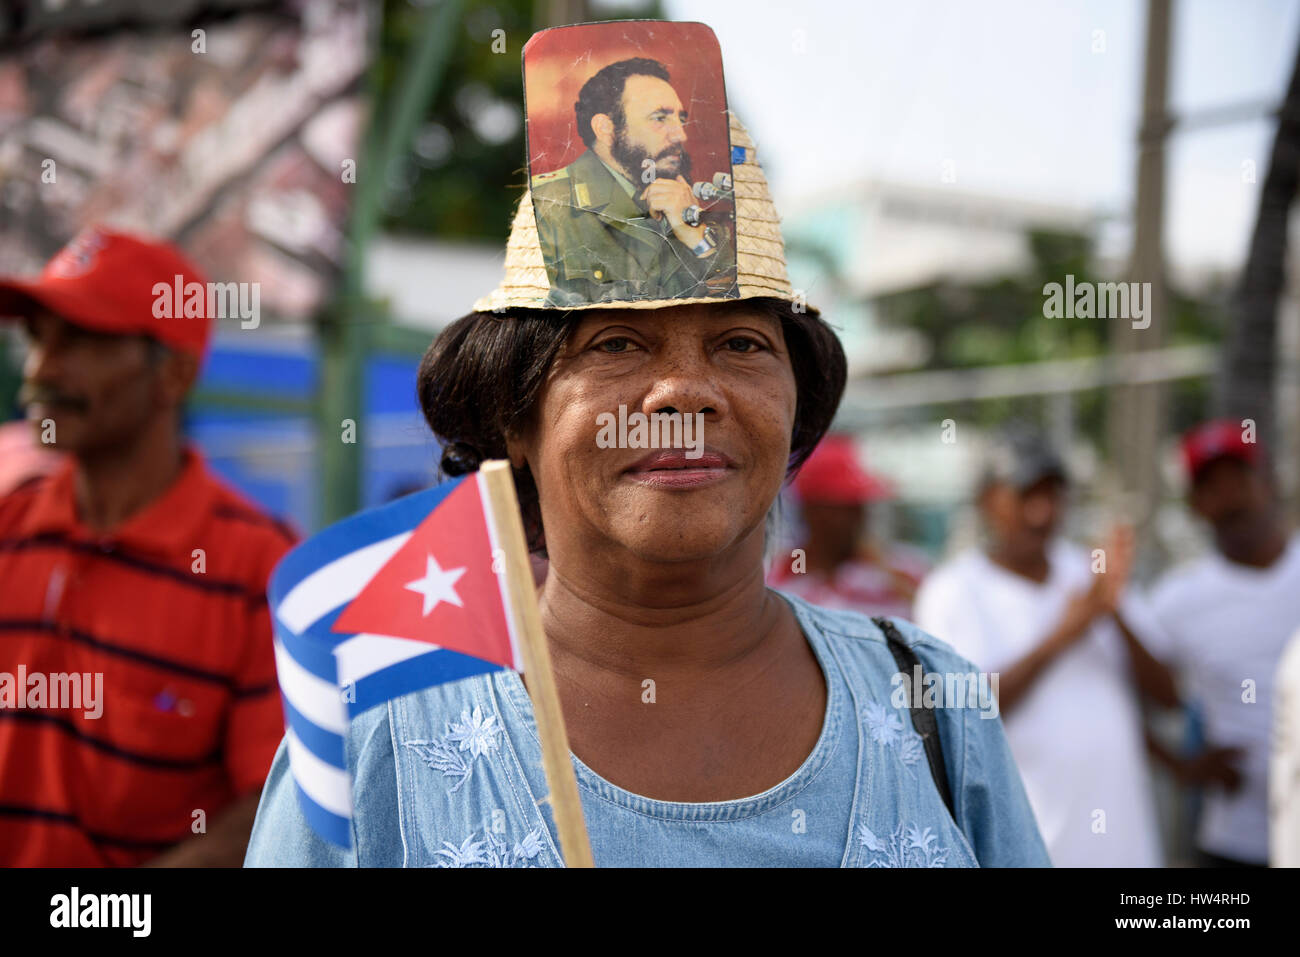 Cuban woman wearing a hat with Fidel Castro photograph attached during the May Day celebrations in Santiago De Cuba, Cuba. Stock Photo